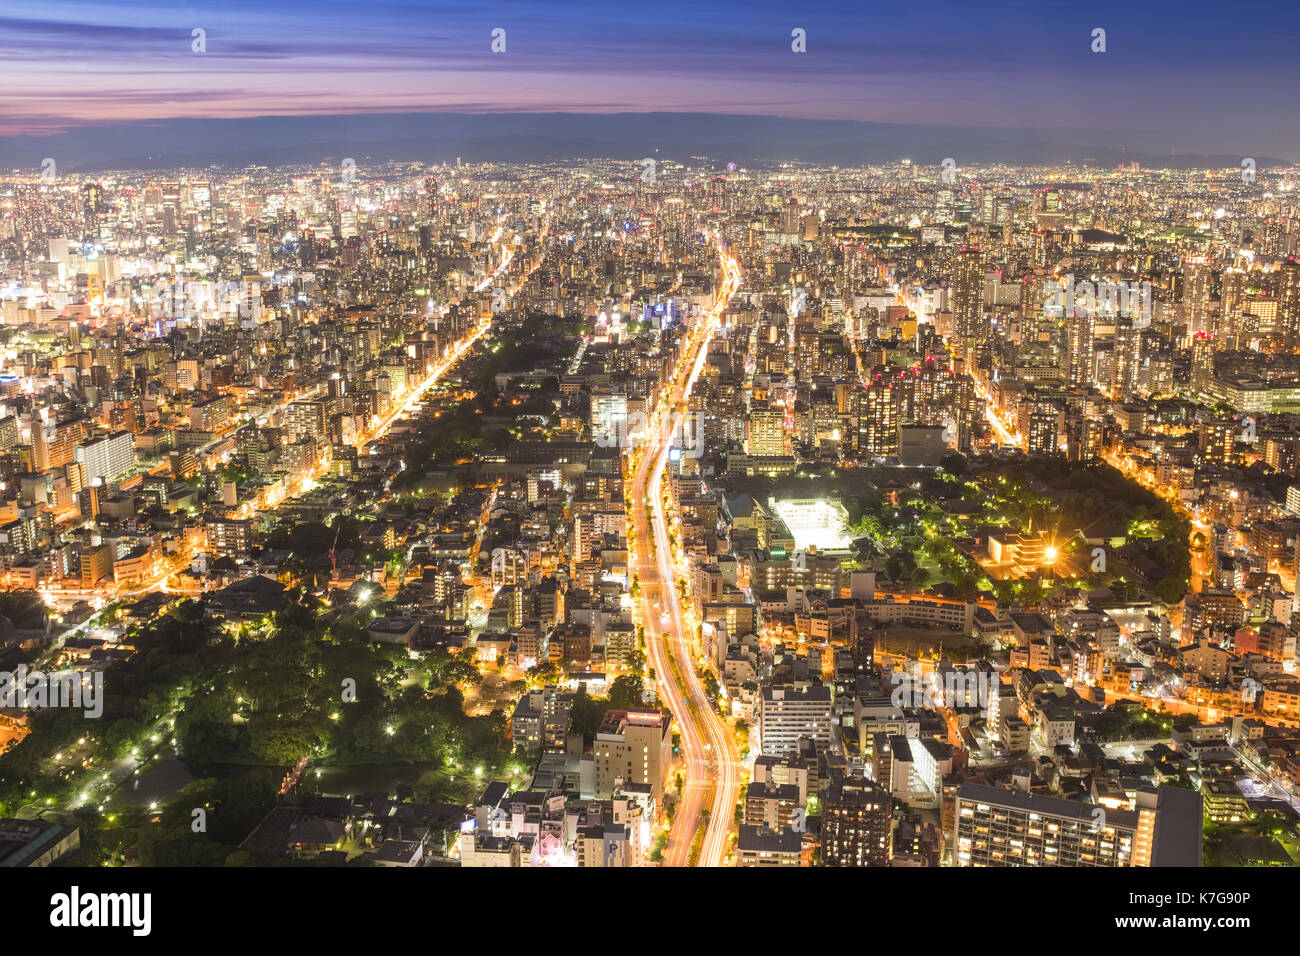 OSAKA, JAPAN - June 12, 2017: Osaka cityscape view 300 meters above ground, Japan. Osaka is the second largest metropolitan area in Japan. View from A Stock Photo